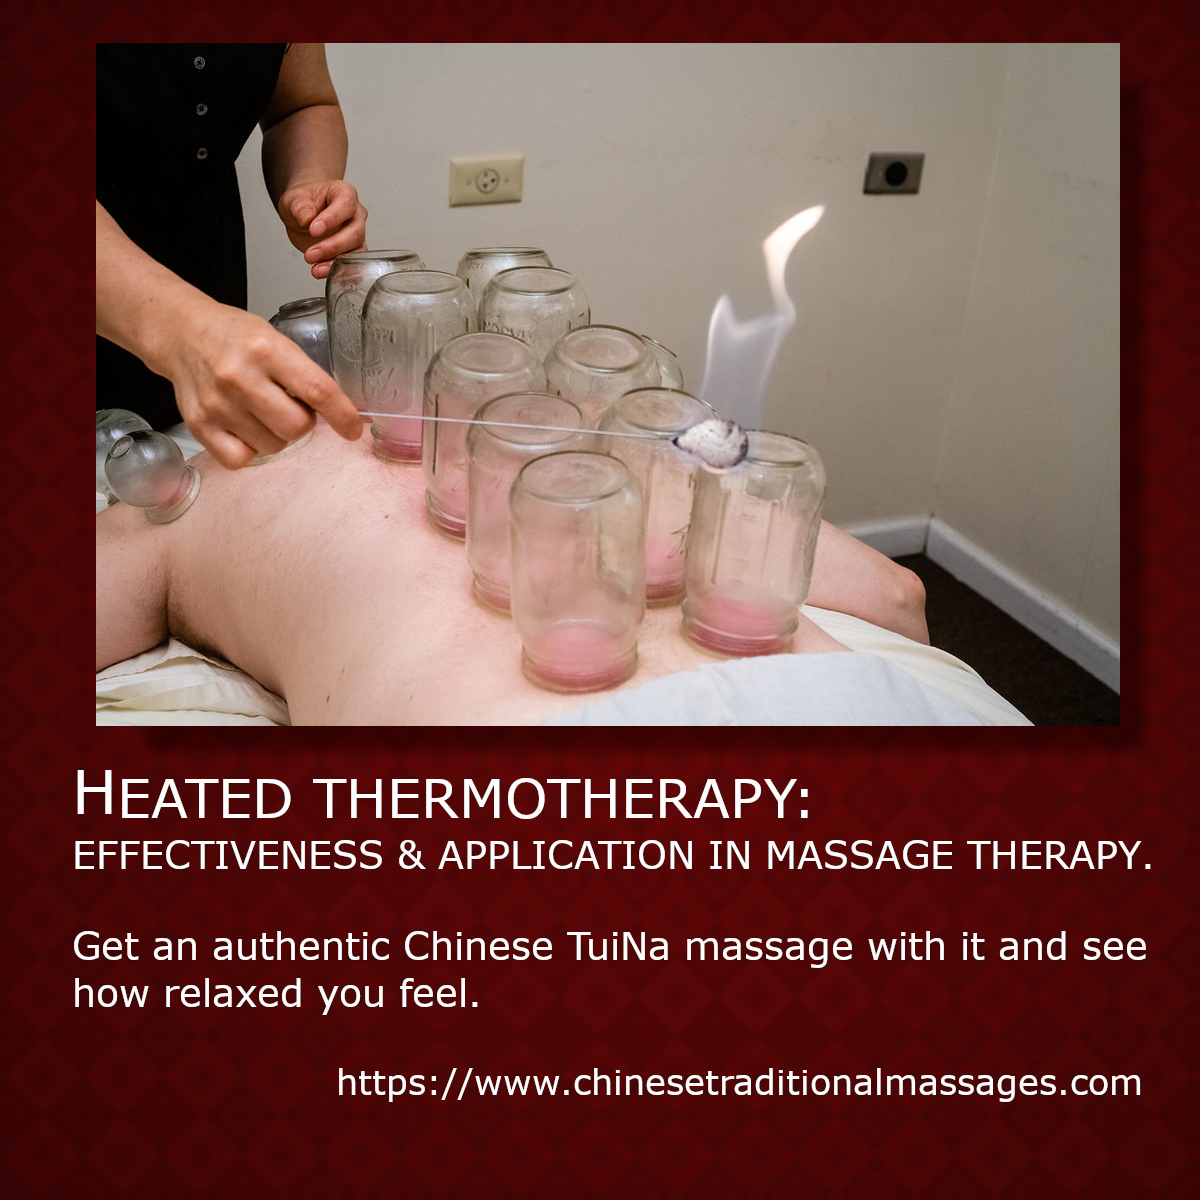 Heated Thermotherapy: Effectiveness & Application in Massage Therapy